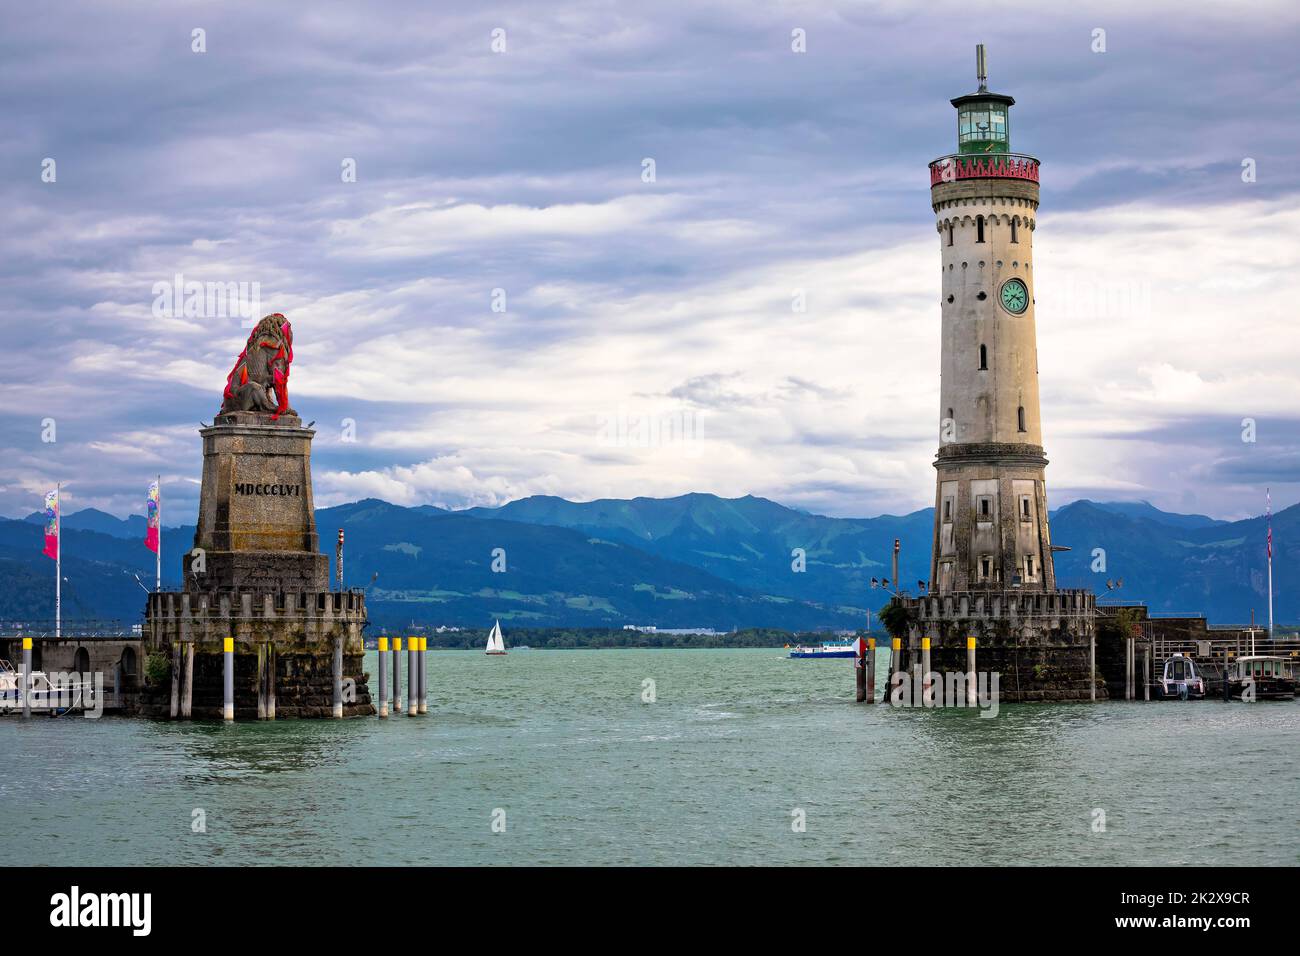 The famous harbor entrance of Lindau Bavarian Lion and New Lighthouse on Bodensee lake view Stock Photo